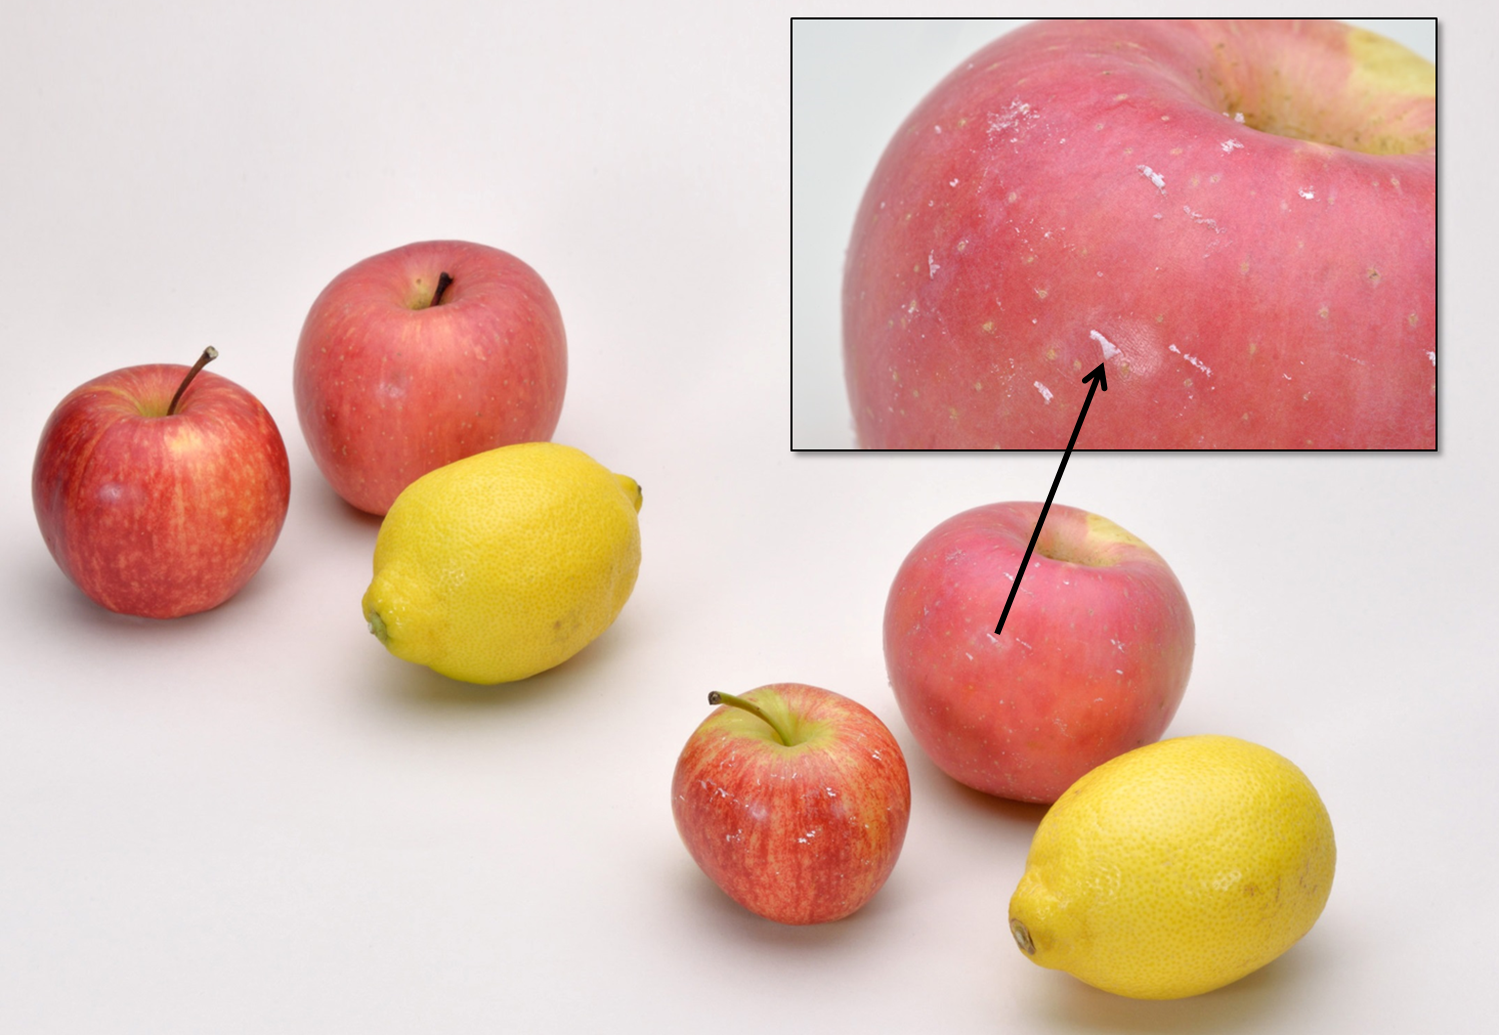 Unwaxed fruits (left) and waxed fruits (right) both have bright shiny surfaces. A waxed apple with bits of its wax scraped off 